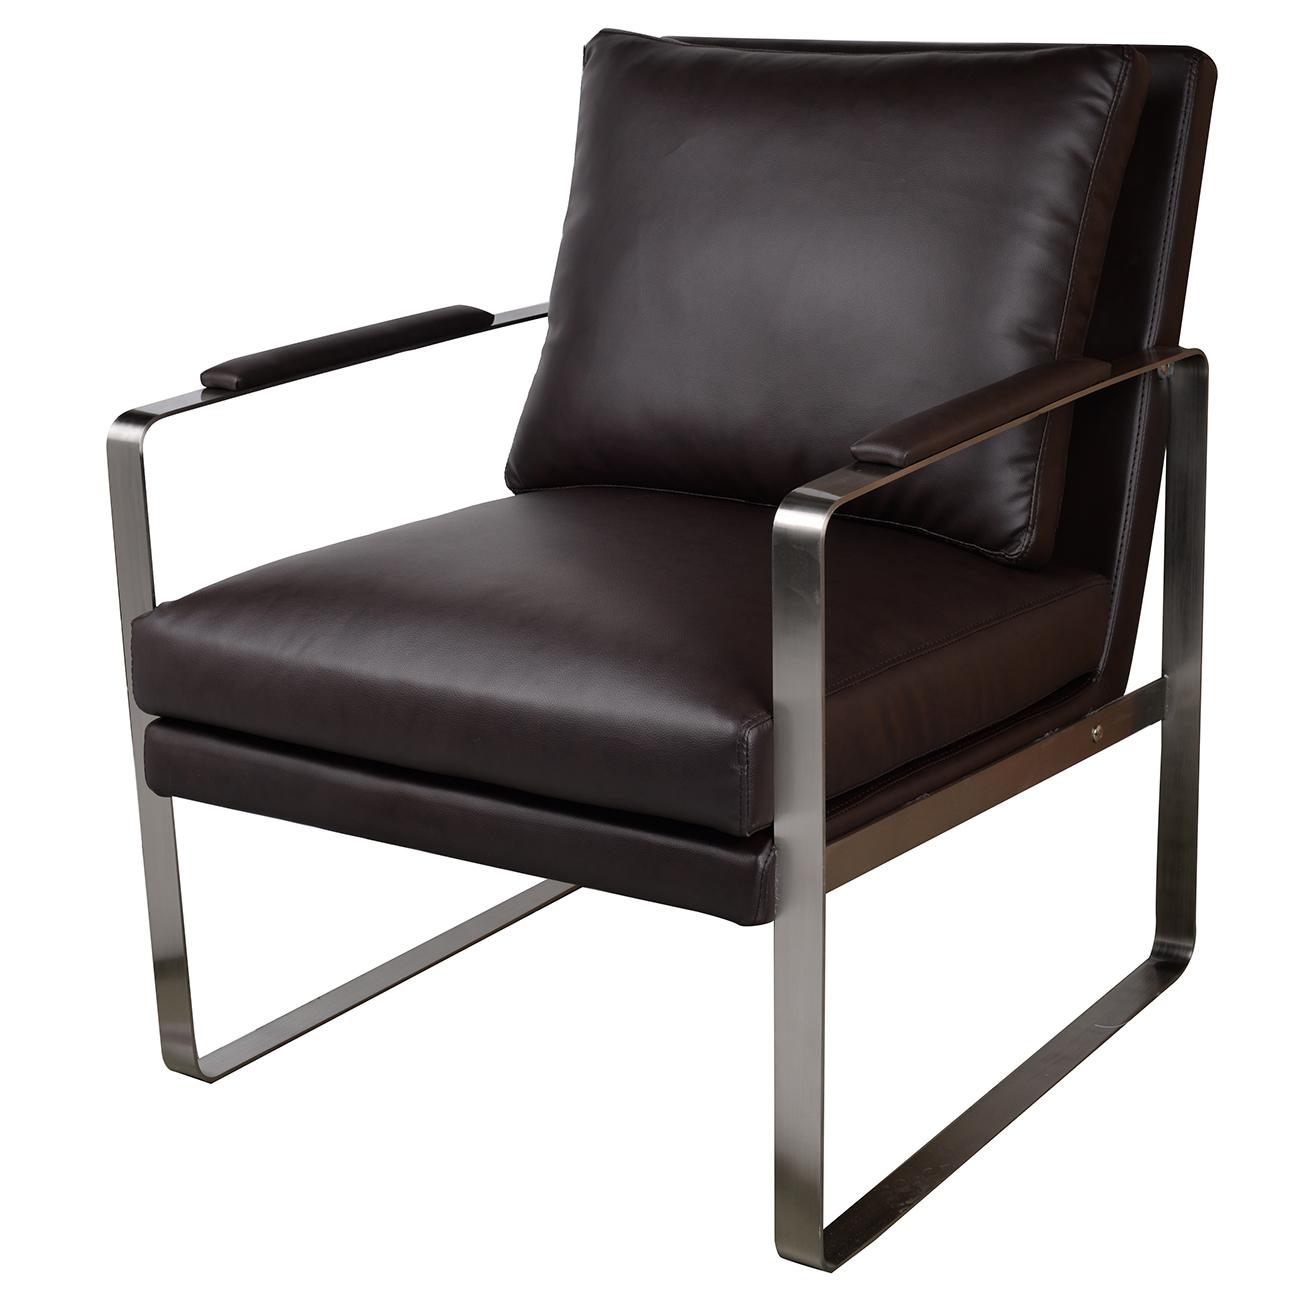 Contemporary Arm Chairs 41017 41017-Armchair-Set-2 in Dark Brown Leather